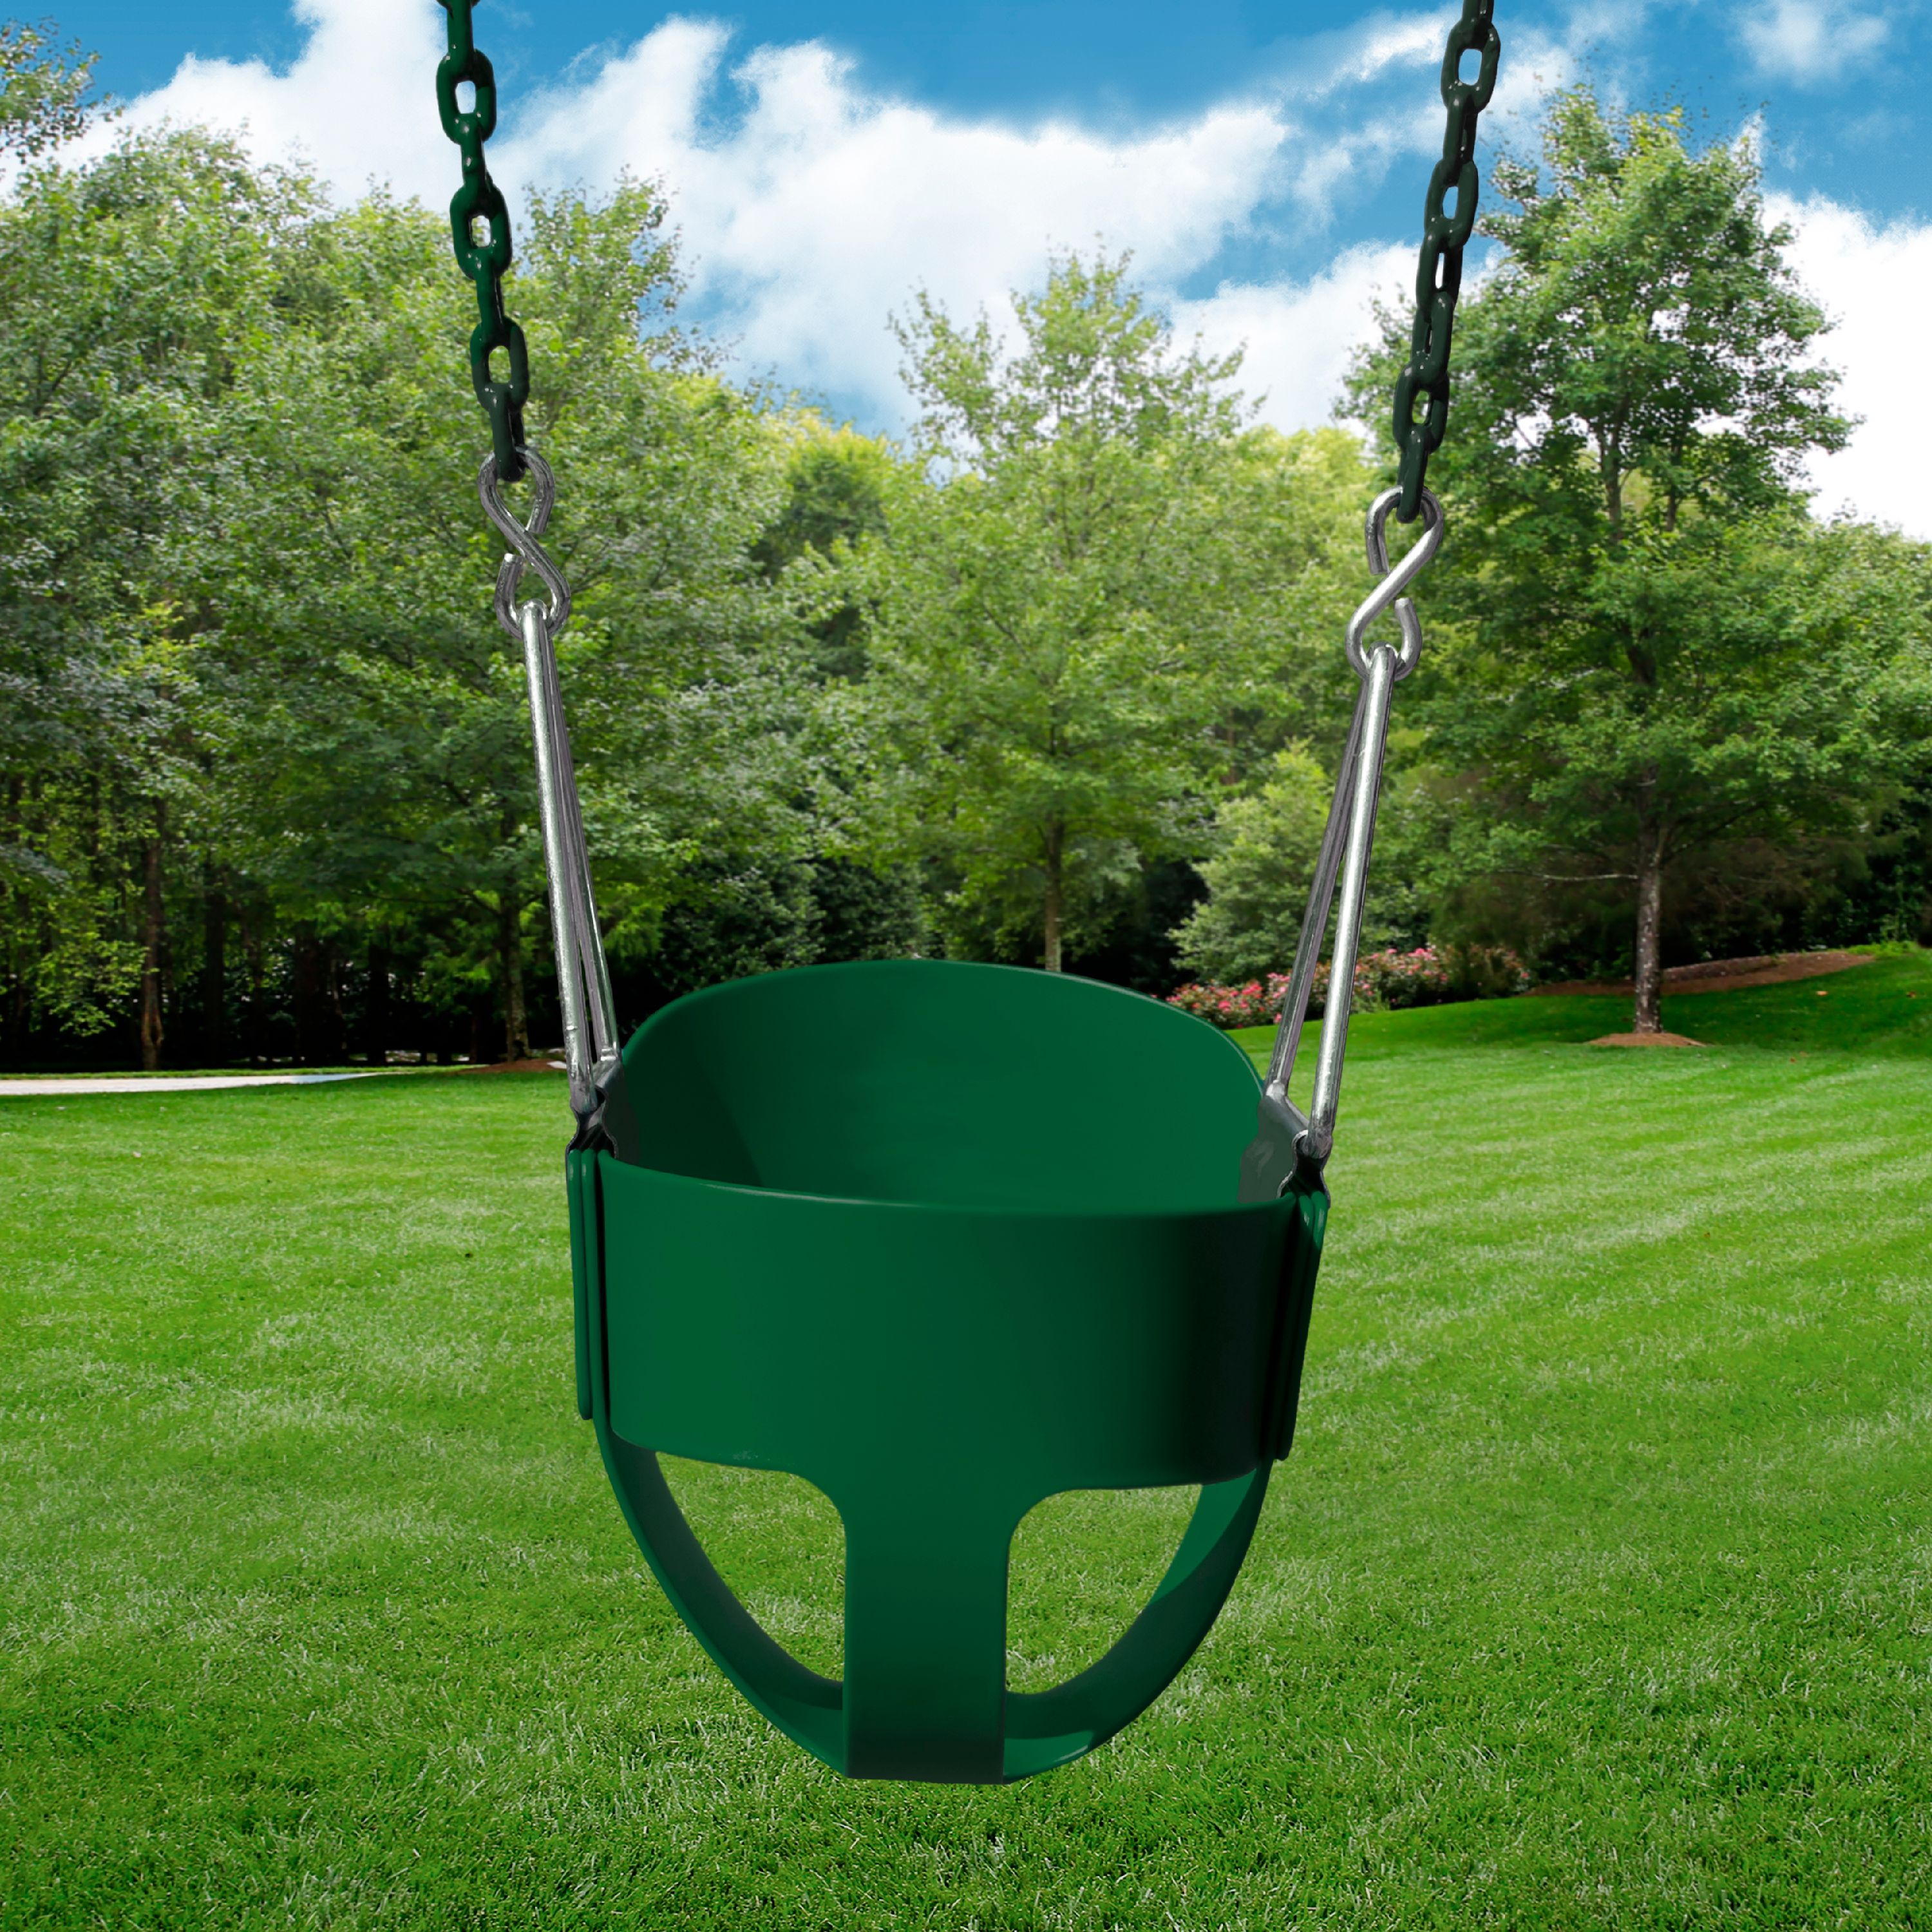 Gorilla Playsets Full Bucket Toddler Swing - Green with Green Chains - image 2 of 7